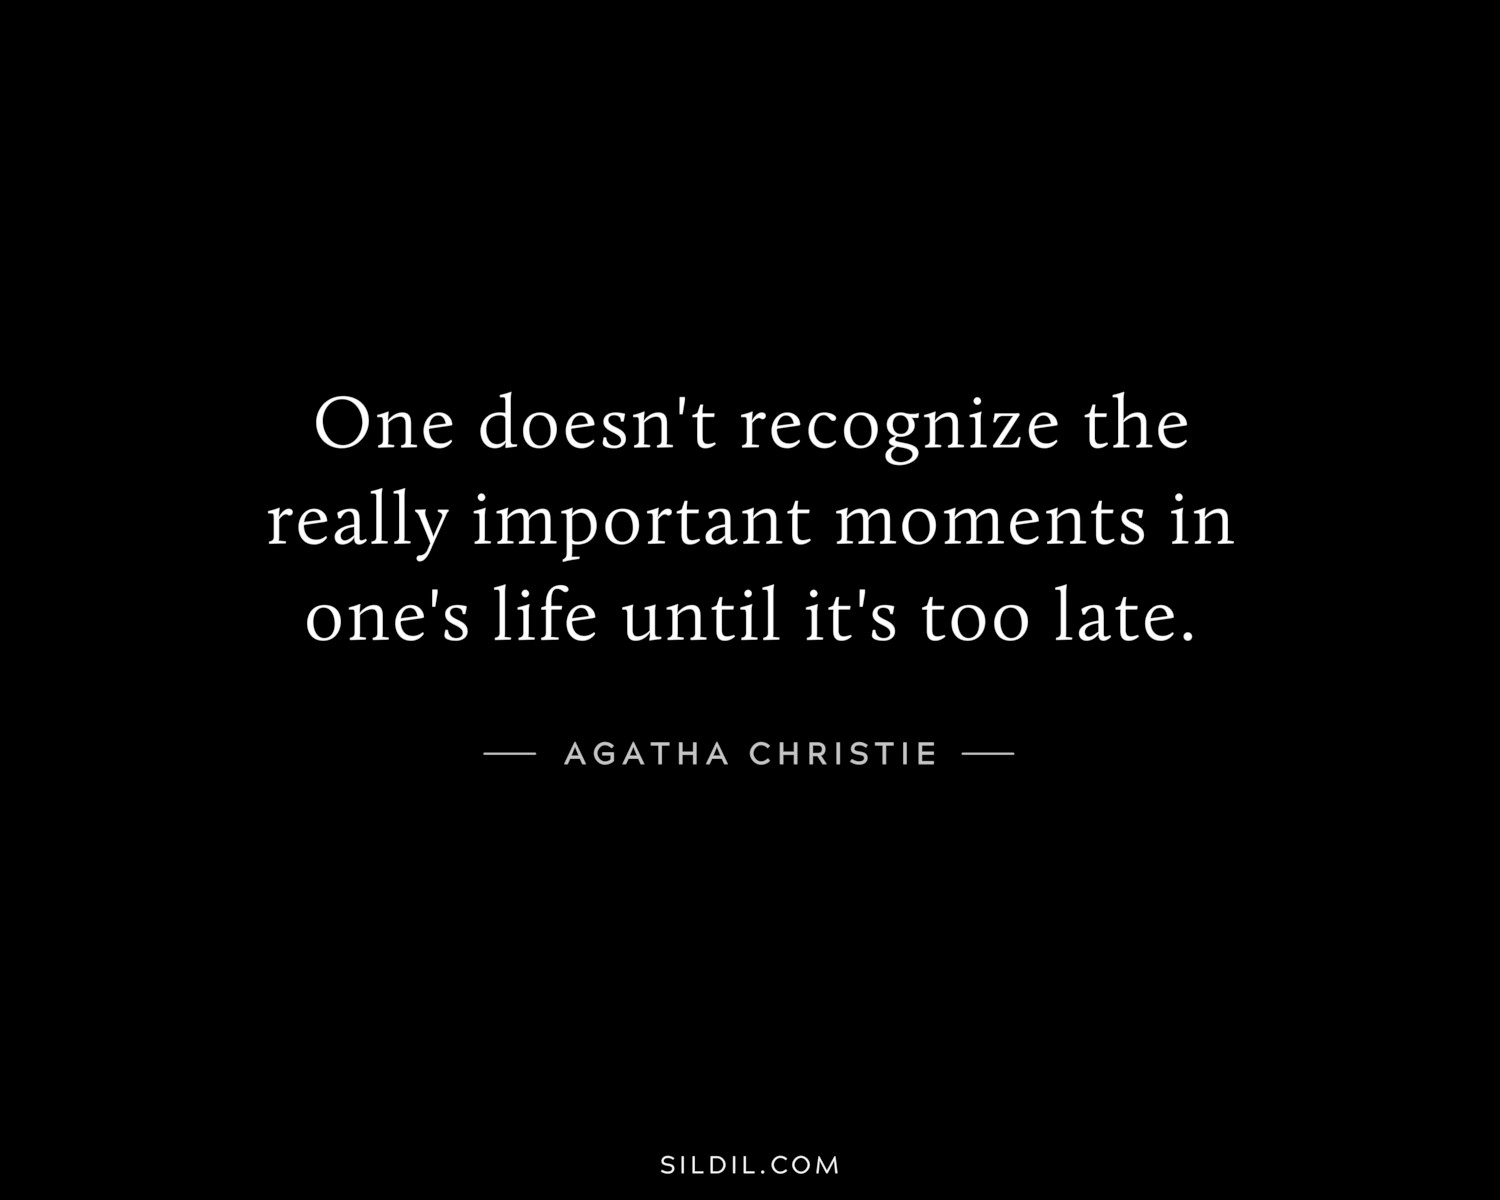 One doesn't recognize the really important moments in one's life until it's too late.